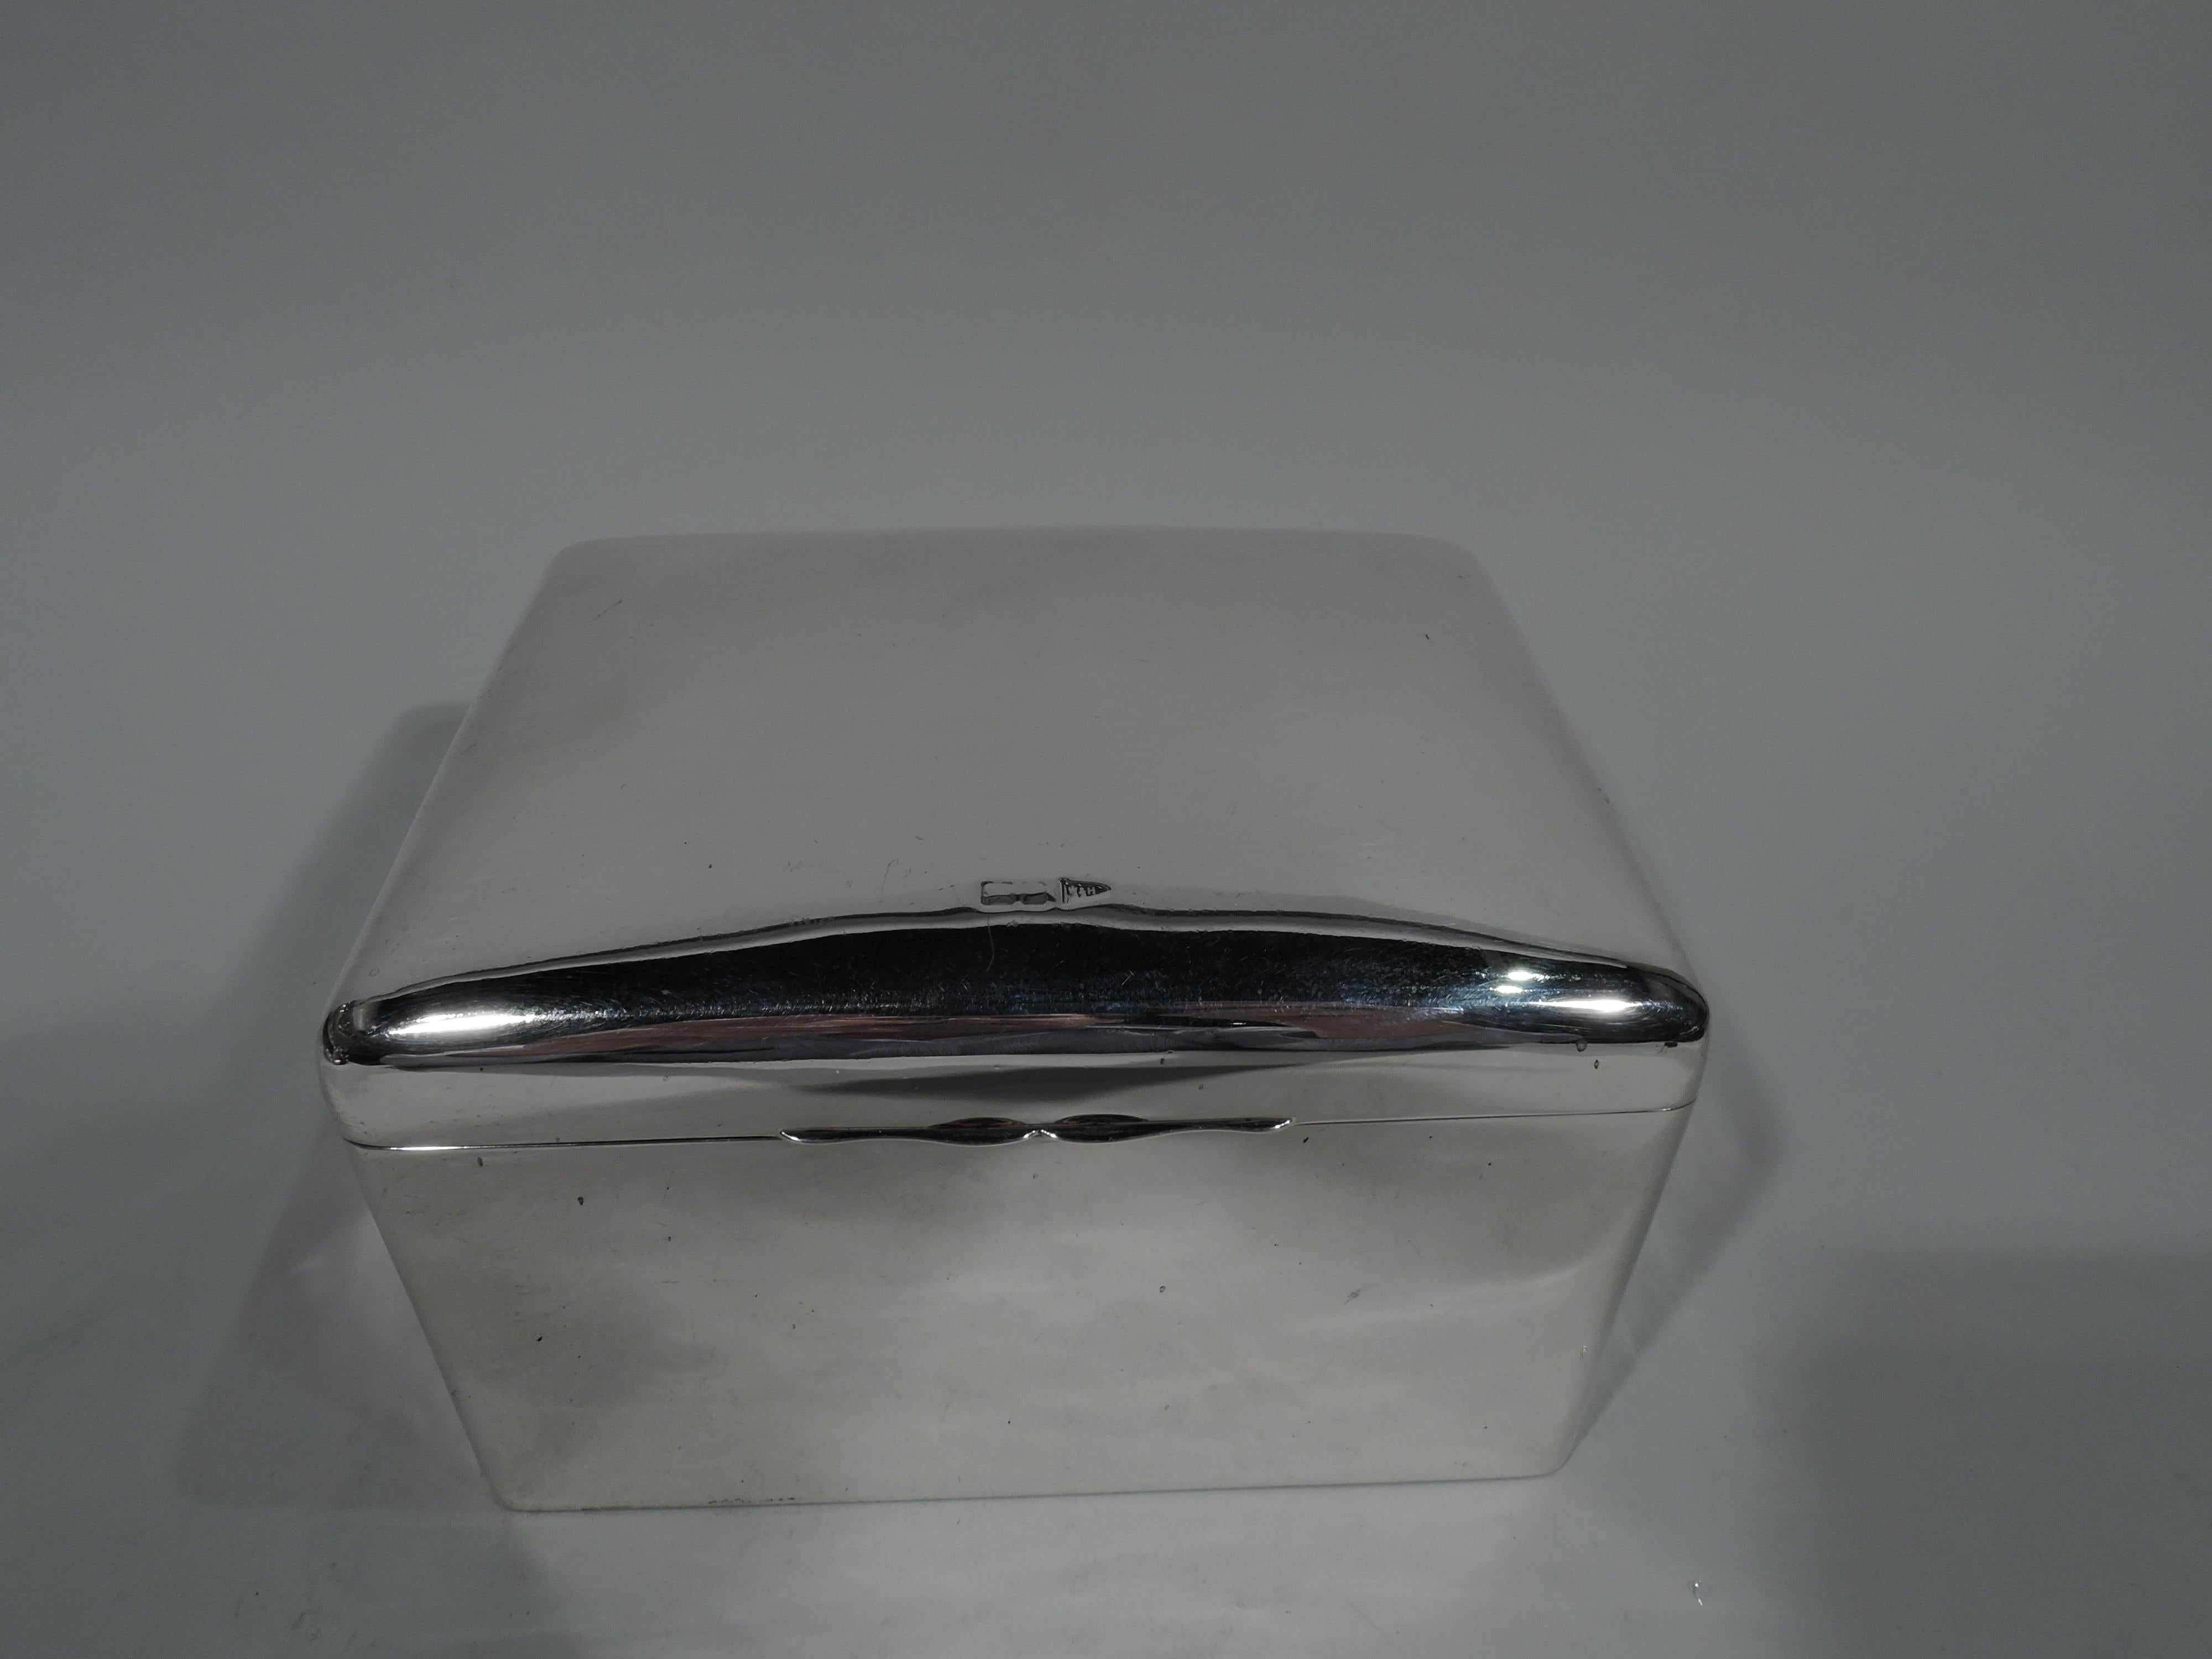 Edwardian sterling silver box. Made by Walker & Hall in Chester in 1906. Rectangular with straight sides and curved corners. Cover curved and hinged with double-scroll tabs. Box interior wood-lined. Cover interior gilt. Box underside leather-lined.